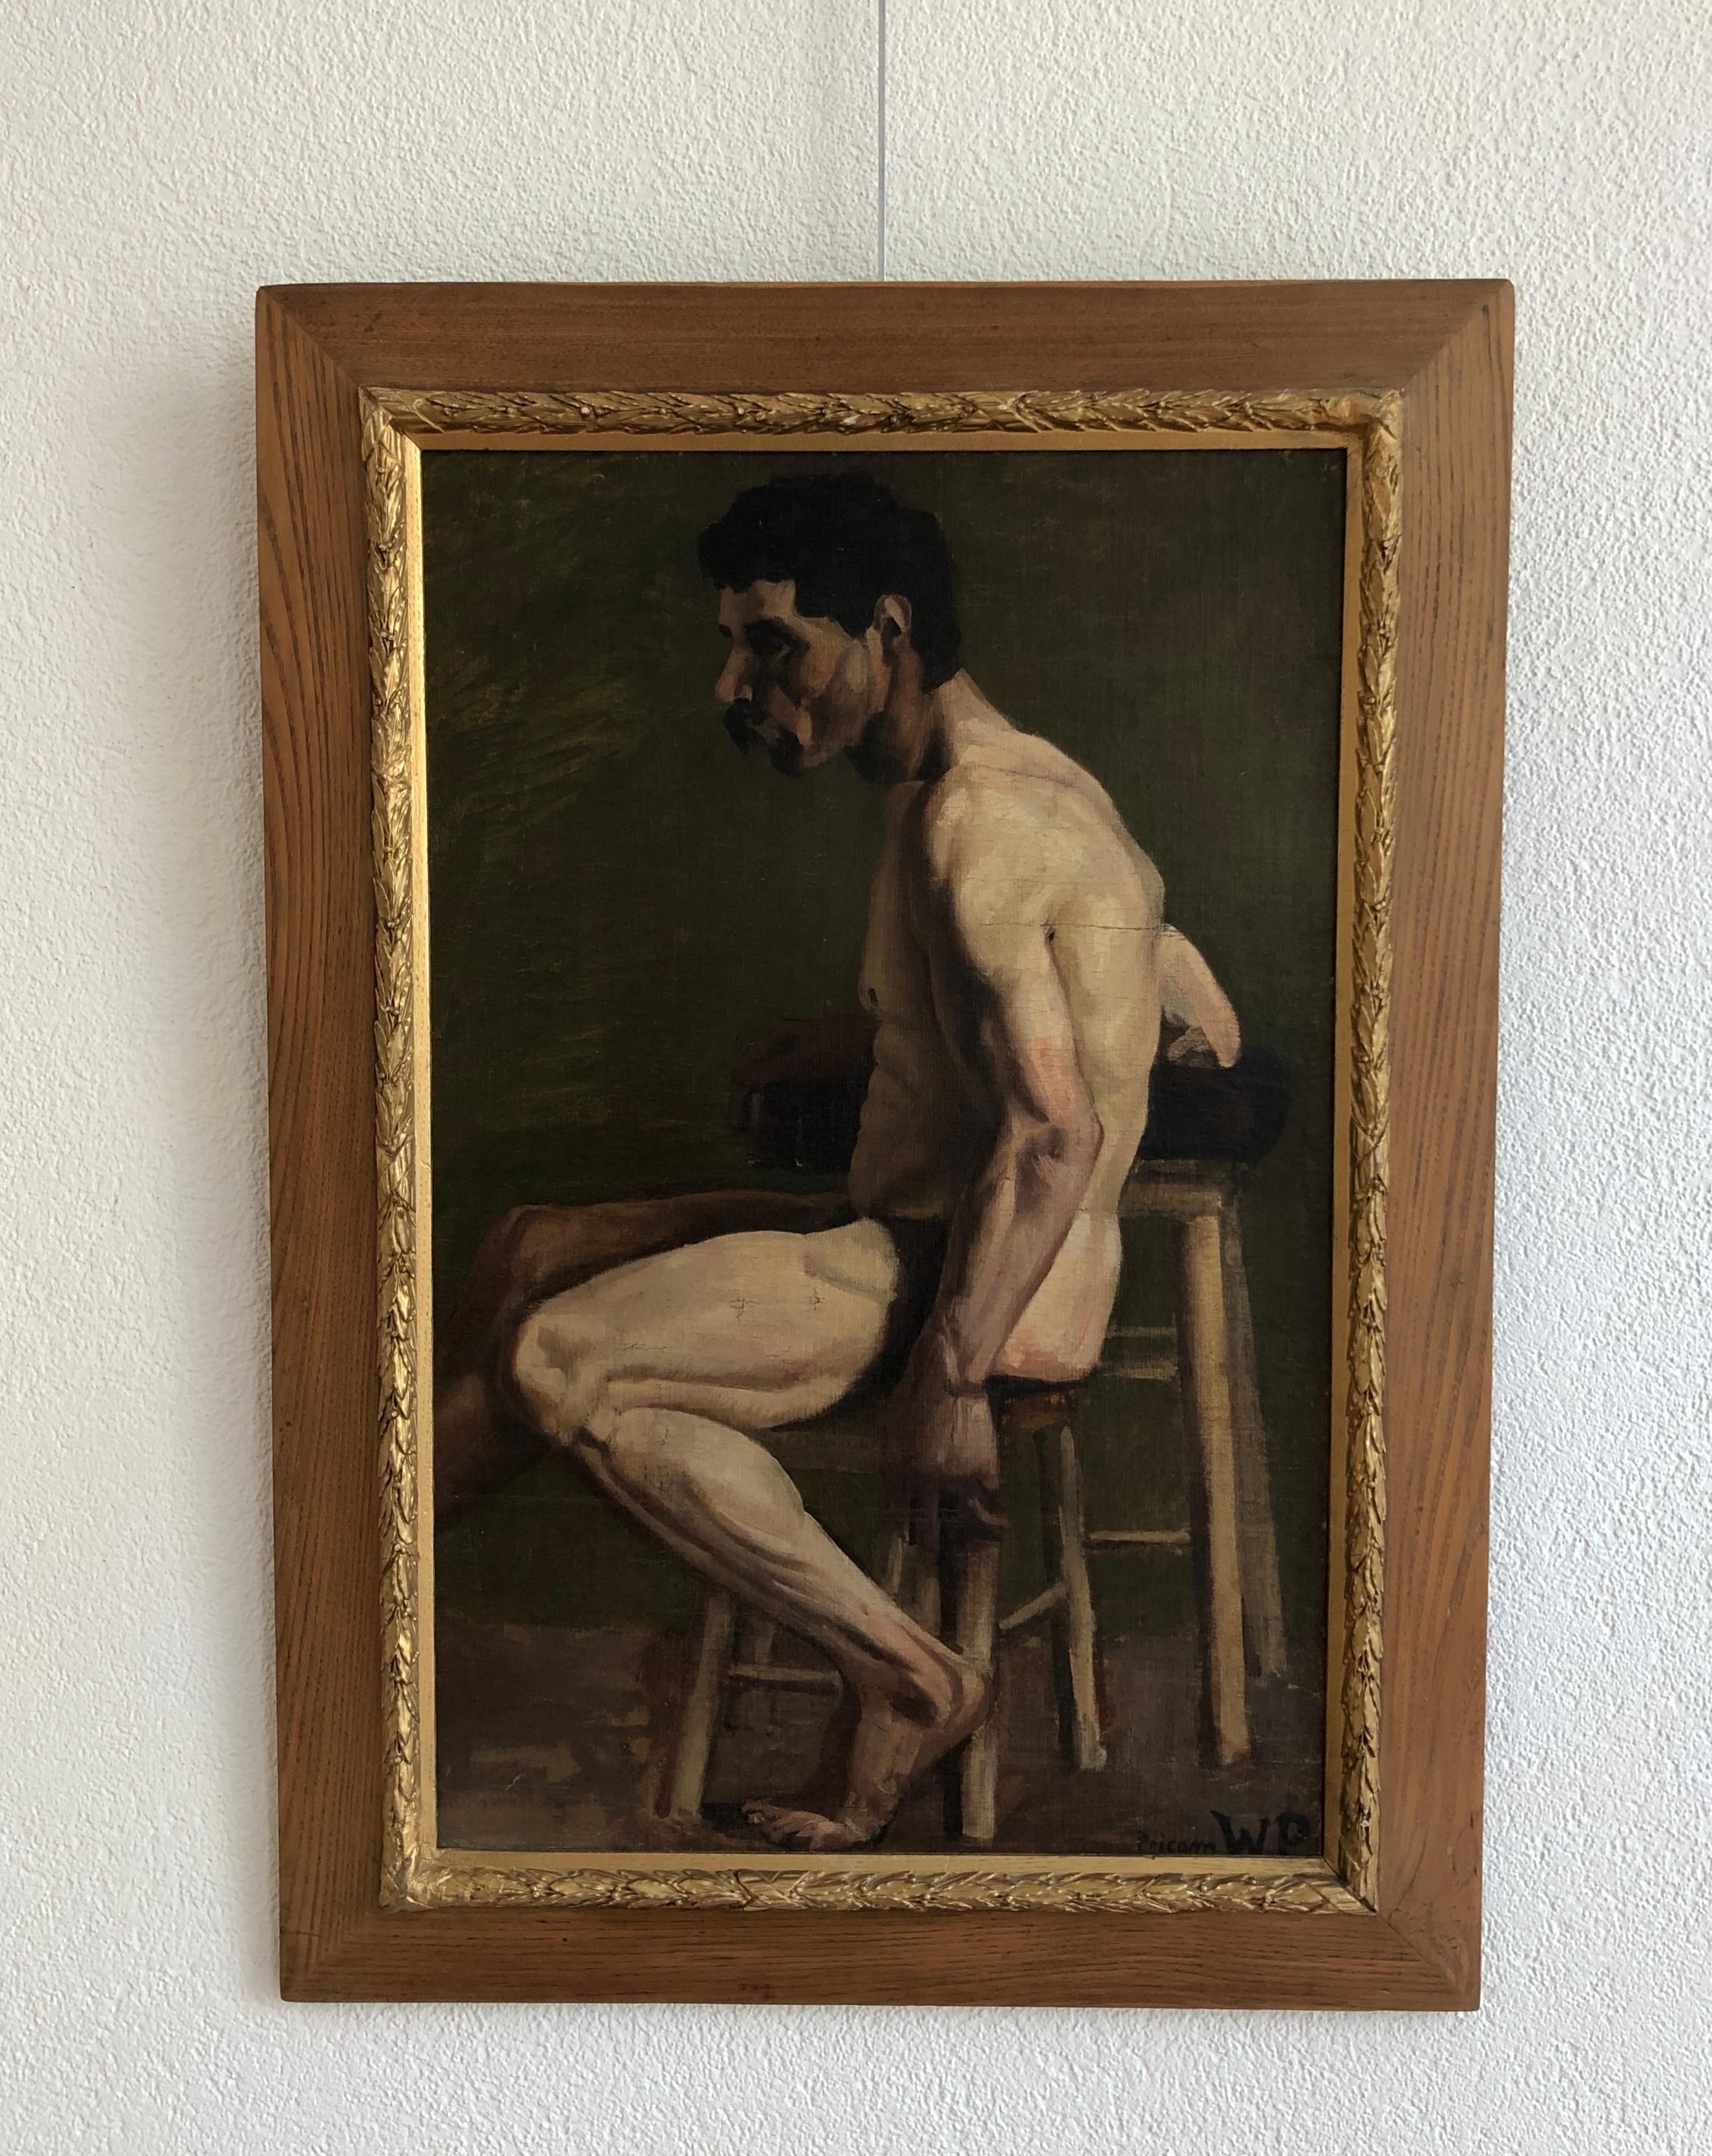 Naked man posing seated - Painting by W.P.